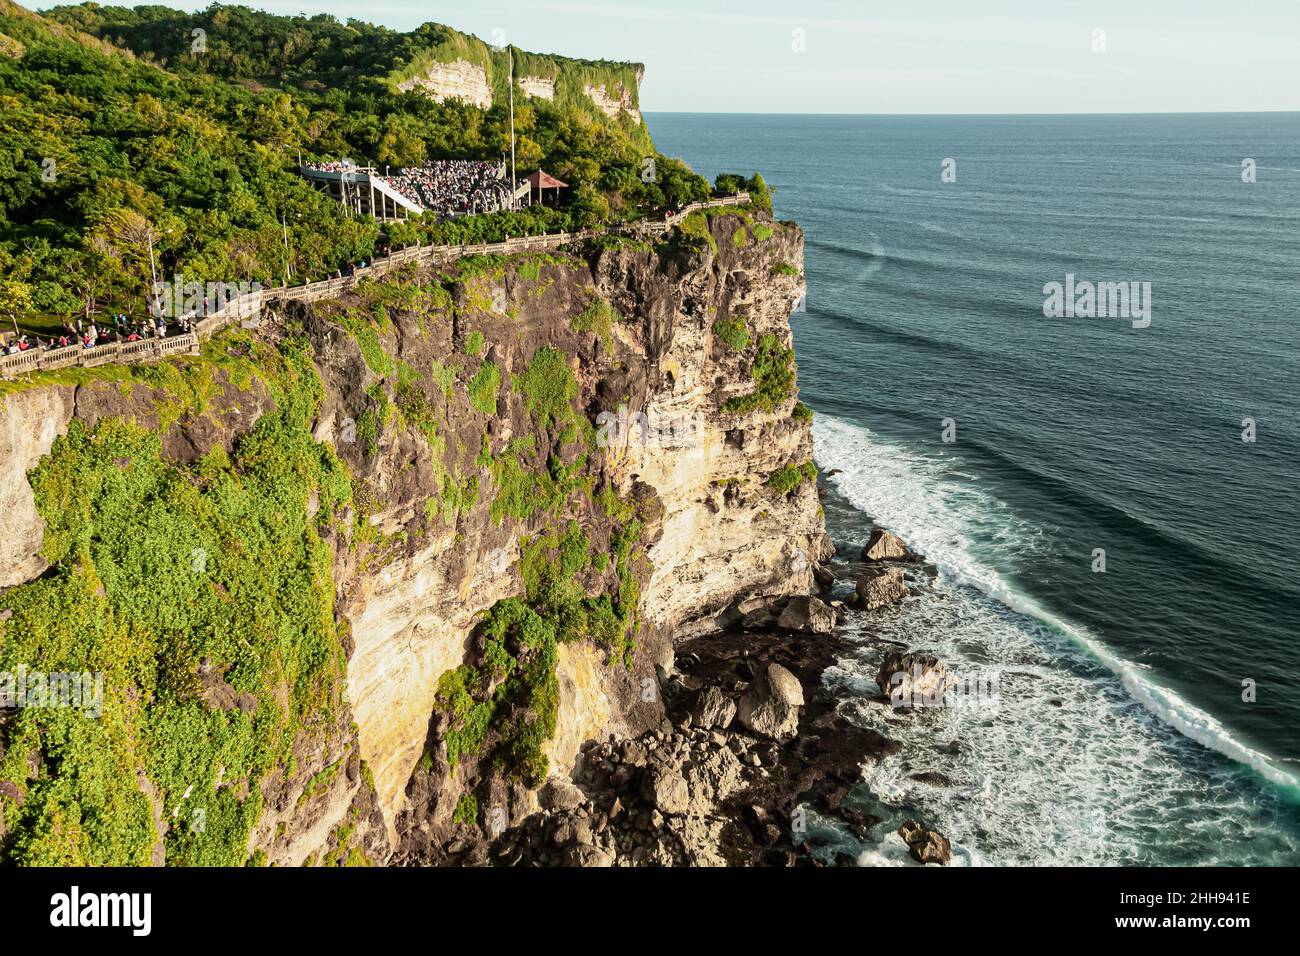 BALI, INDONESIA - MARCH 1, 2014: View of the traditional Balinese dance open-air amphitheater Stock Photo